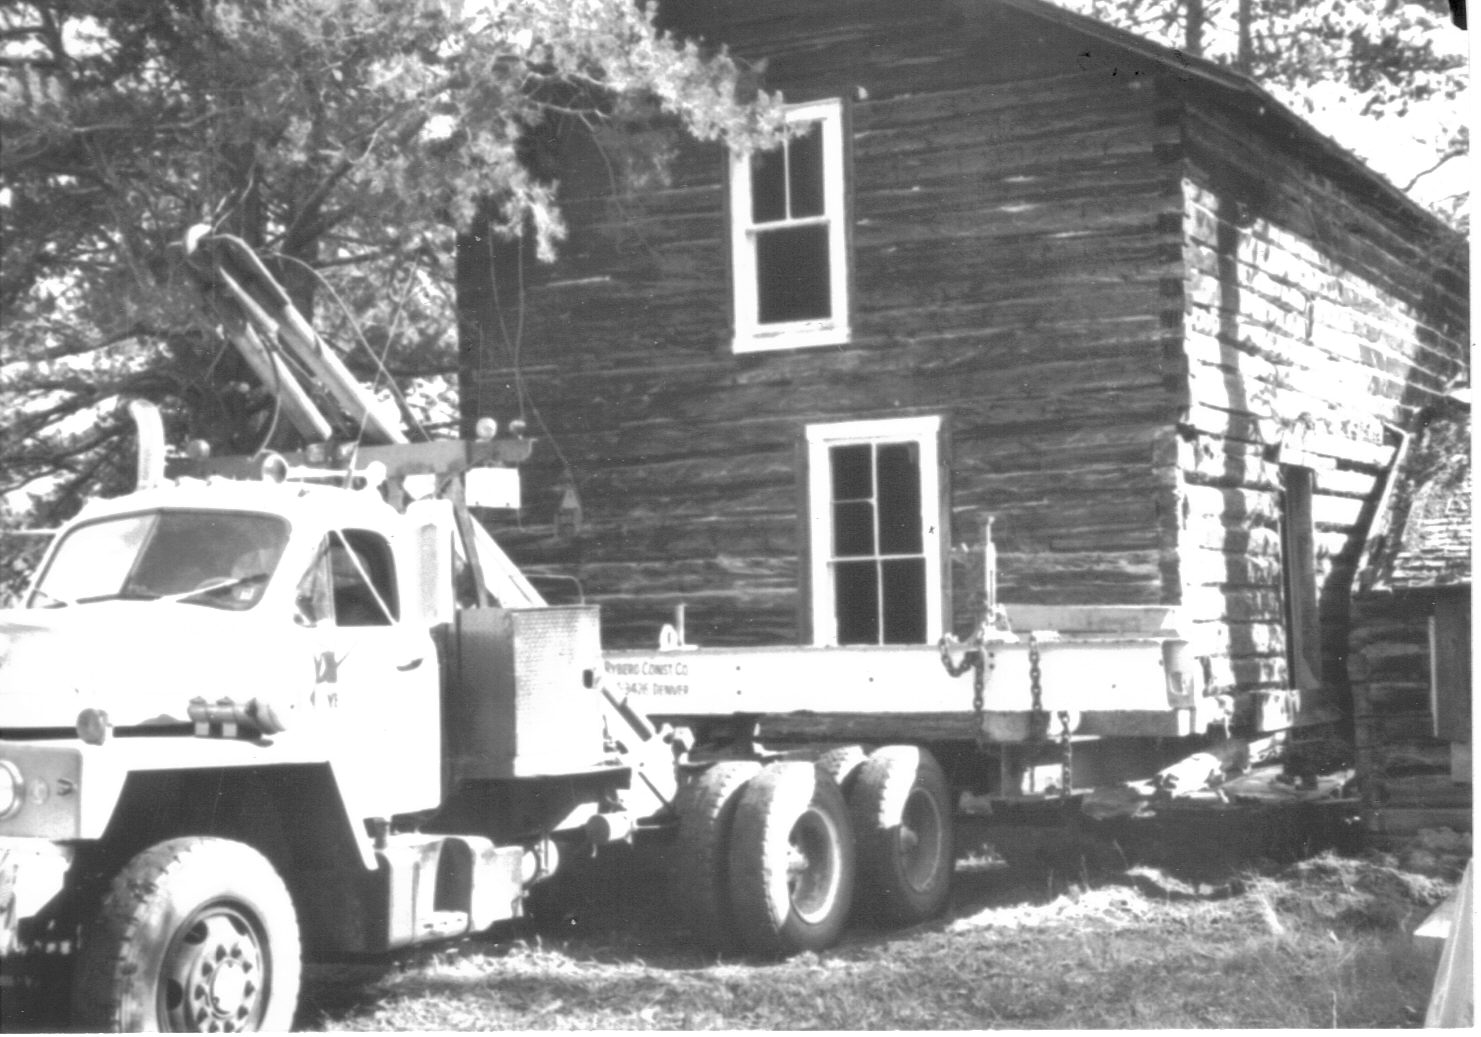 A photo of the relocation of Bill’s Ranch house from its location to the Frisco Historic Park in the mid 1980’s.